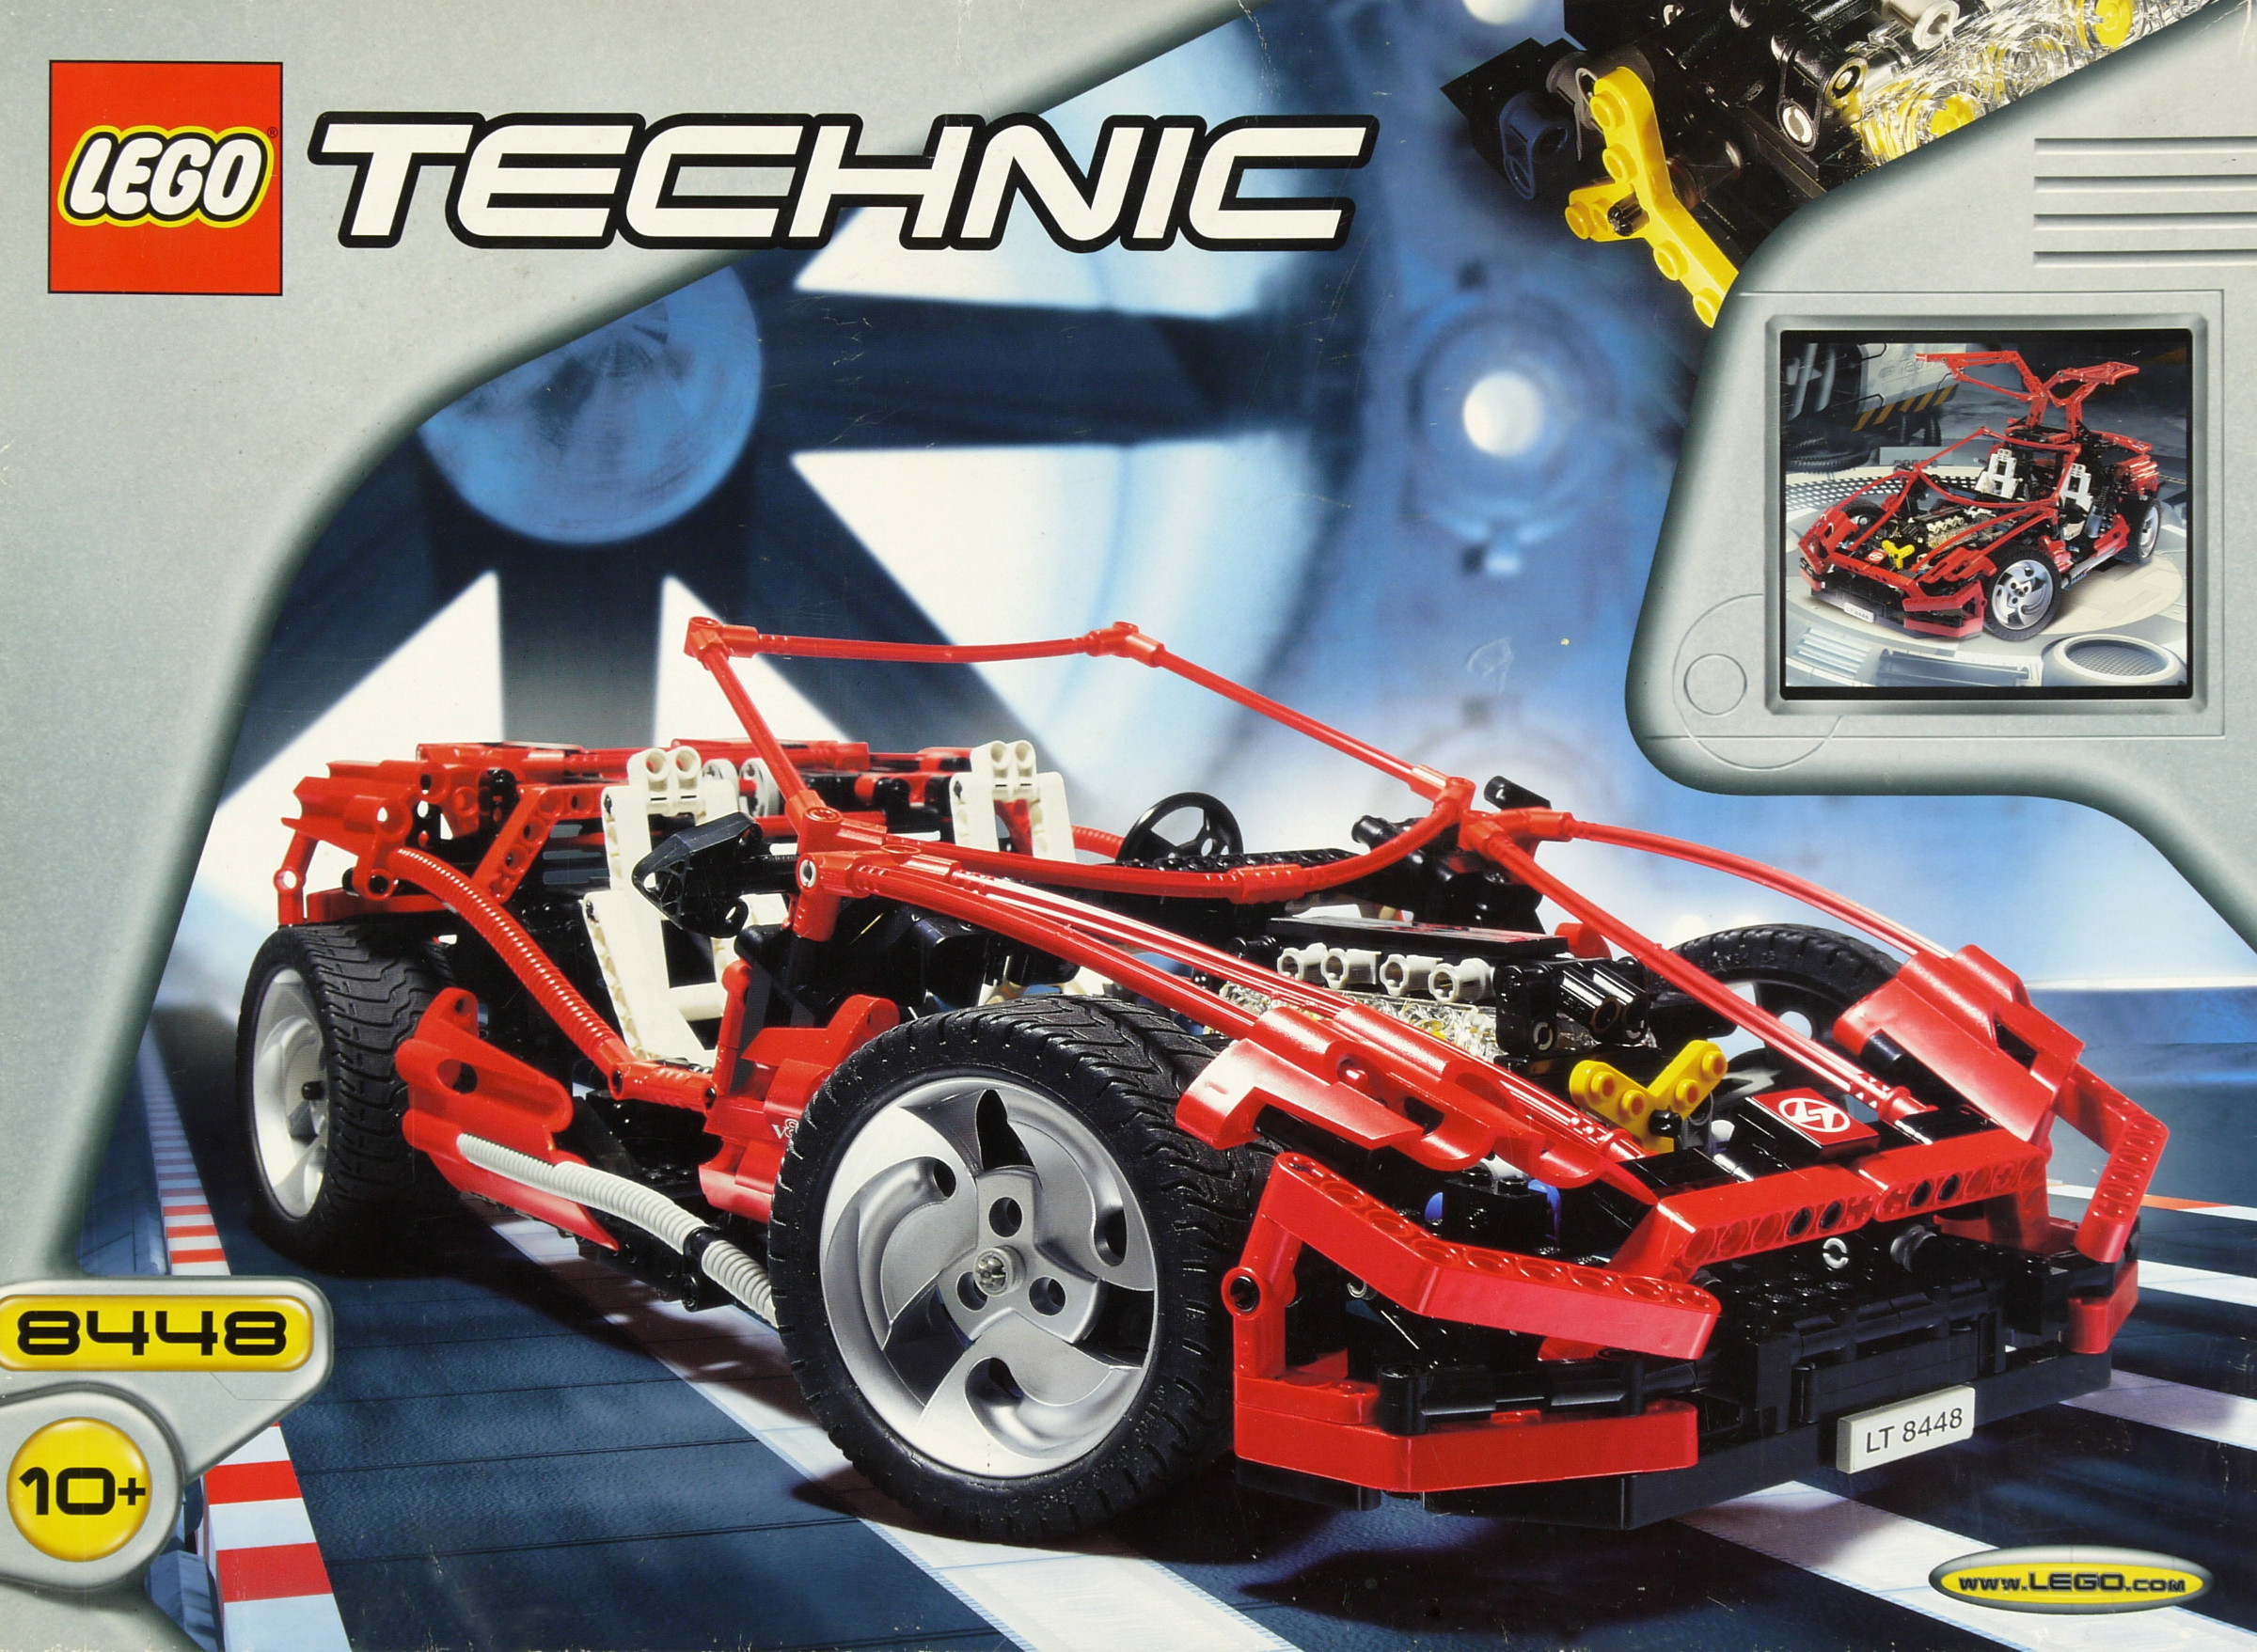 Massive LEGO TECHNIC Car Collection Overview! 